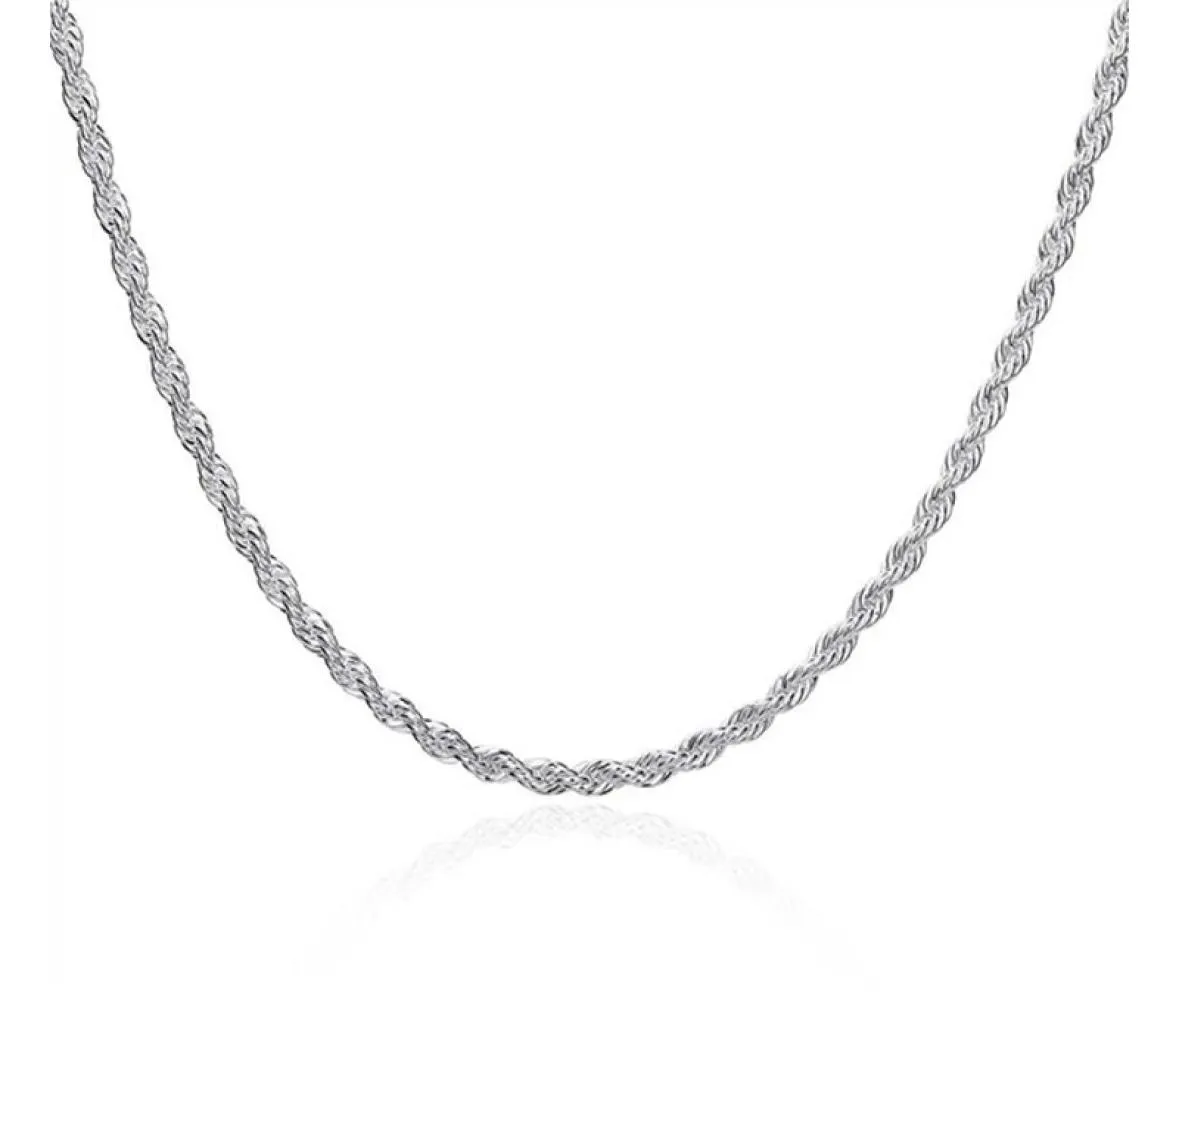 Topppläterade Sterling Silver Necklace 4mm Men ed Rope Chains 16 18 20 22 24 tum DHSN067 925 Silver Plate Neckor Jewel9450957